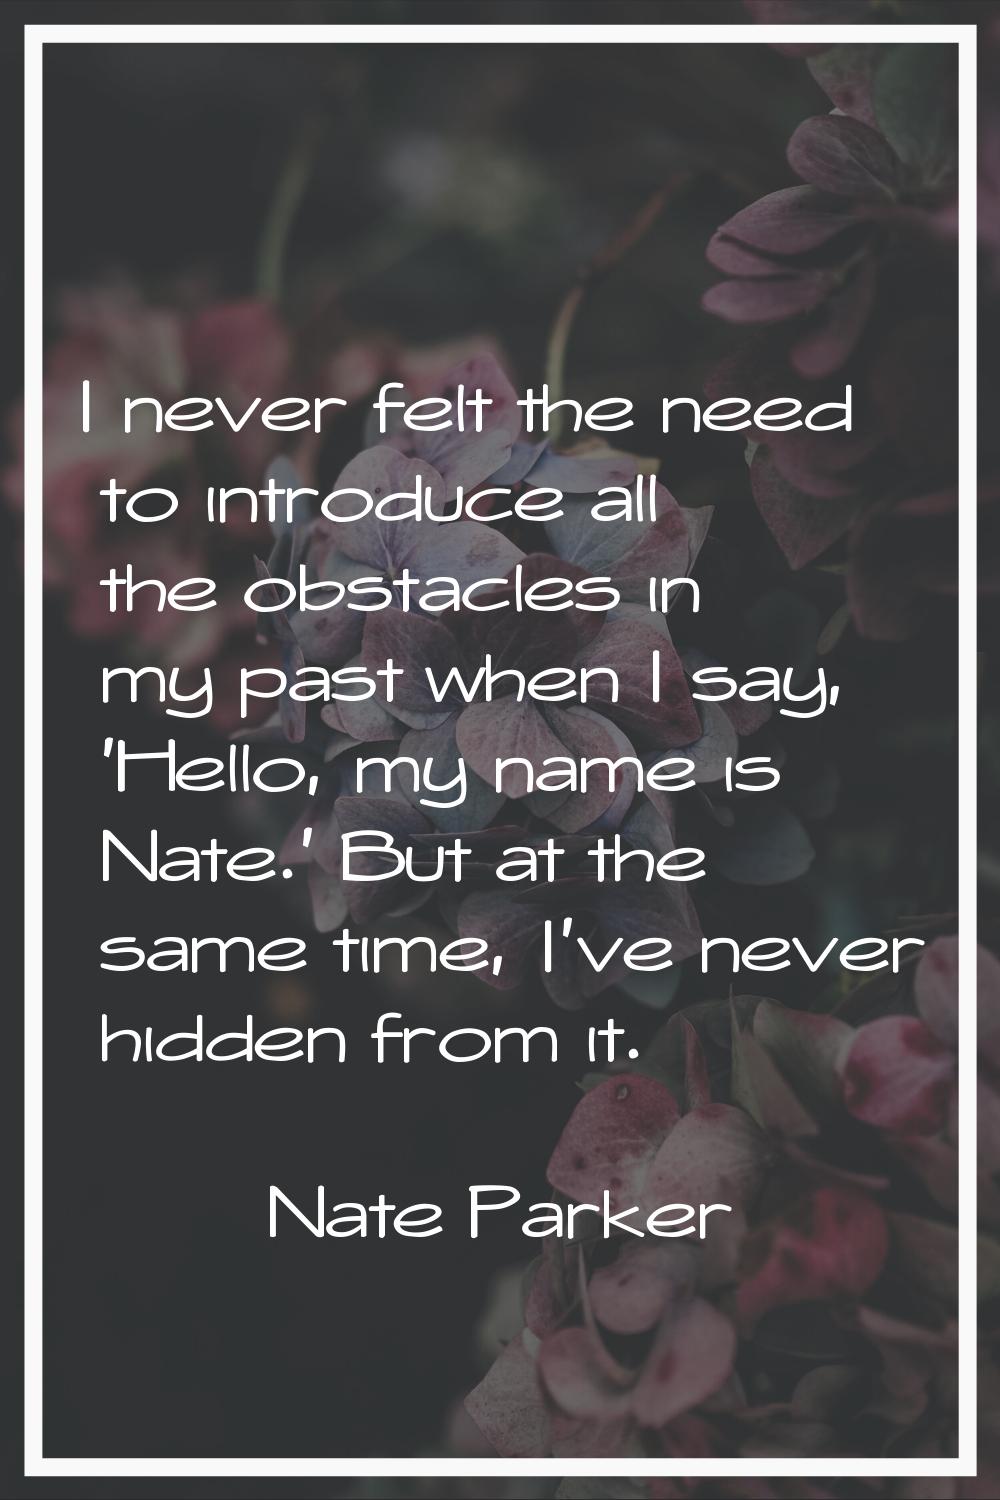 I never felt the need to introduce all the obstacles in my past when I say, 'Hello, my name is Nate